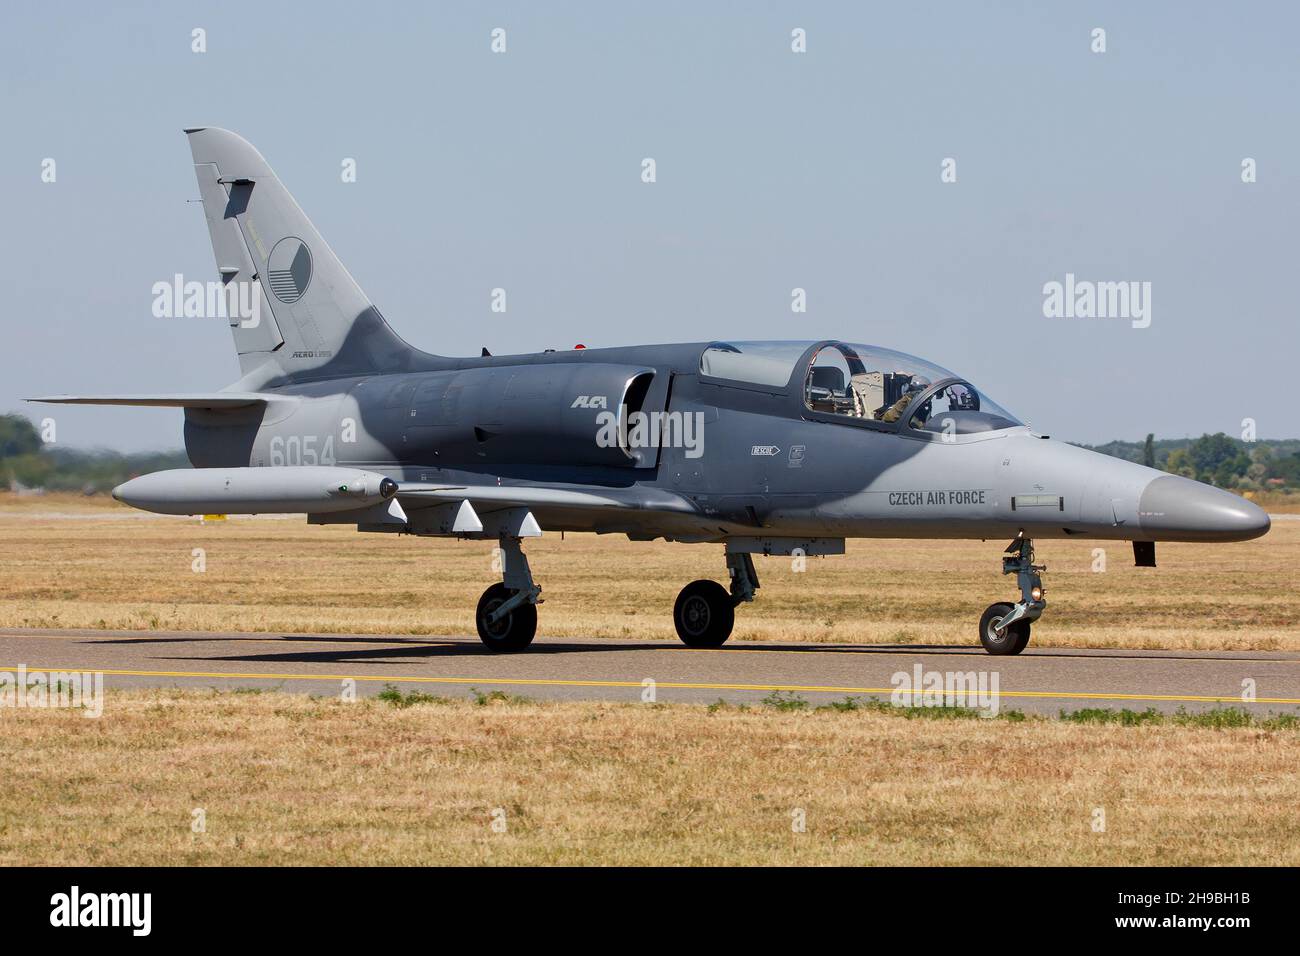 KECSKEMET, HUNGARY - Aug 09, 2013: Czech Air Force L-159 ALCA light attack fighter jet on the ground taxiing to the runway Stock Photo